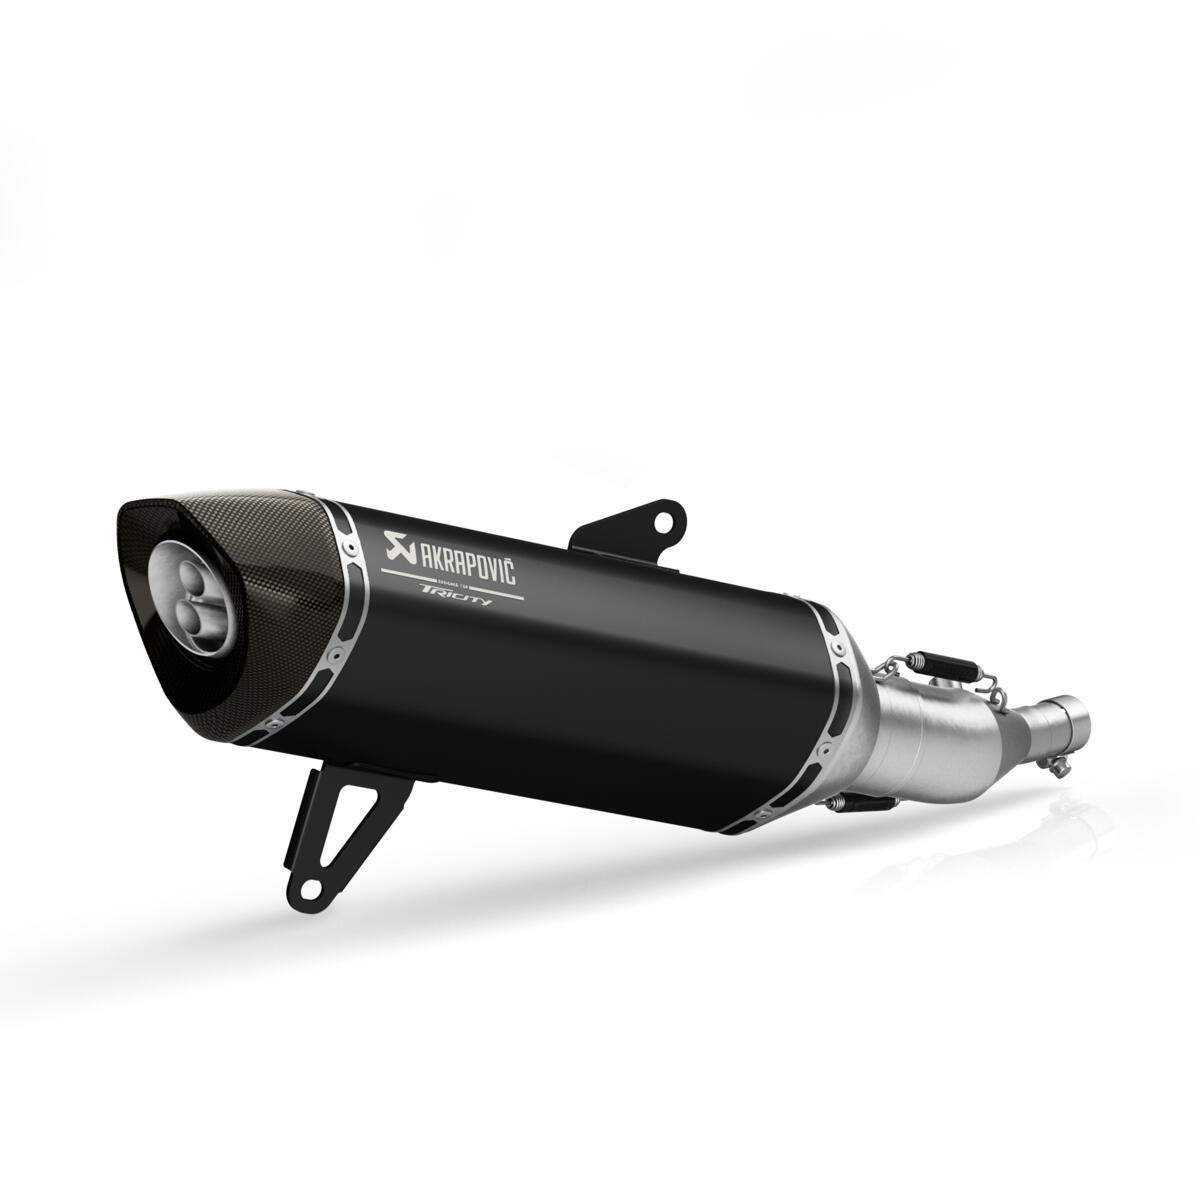 Made of high quality, heat resistant stainless steel, exciting sound and design. This is a non Yamaha branded product and is fully developed and produced by Akrapovic.